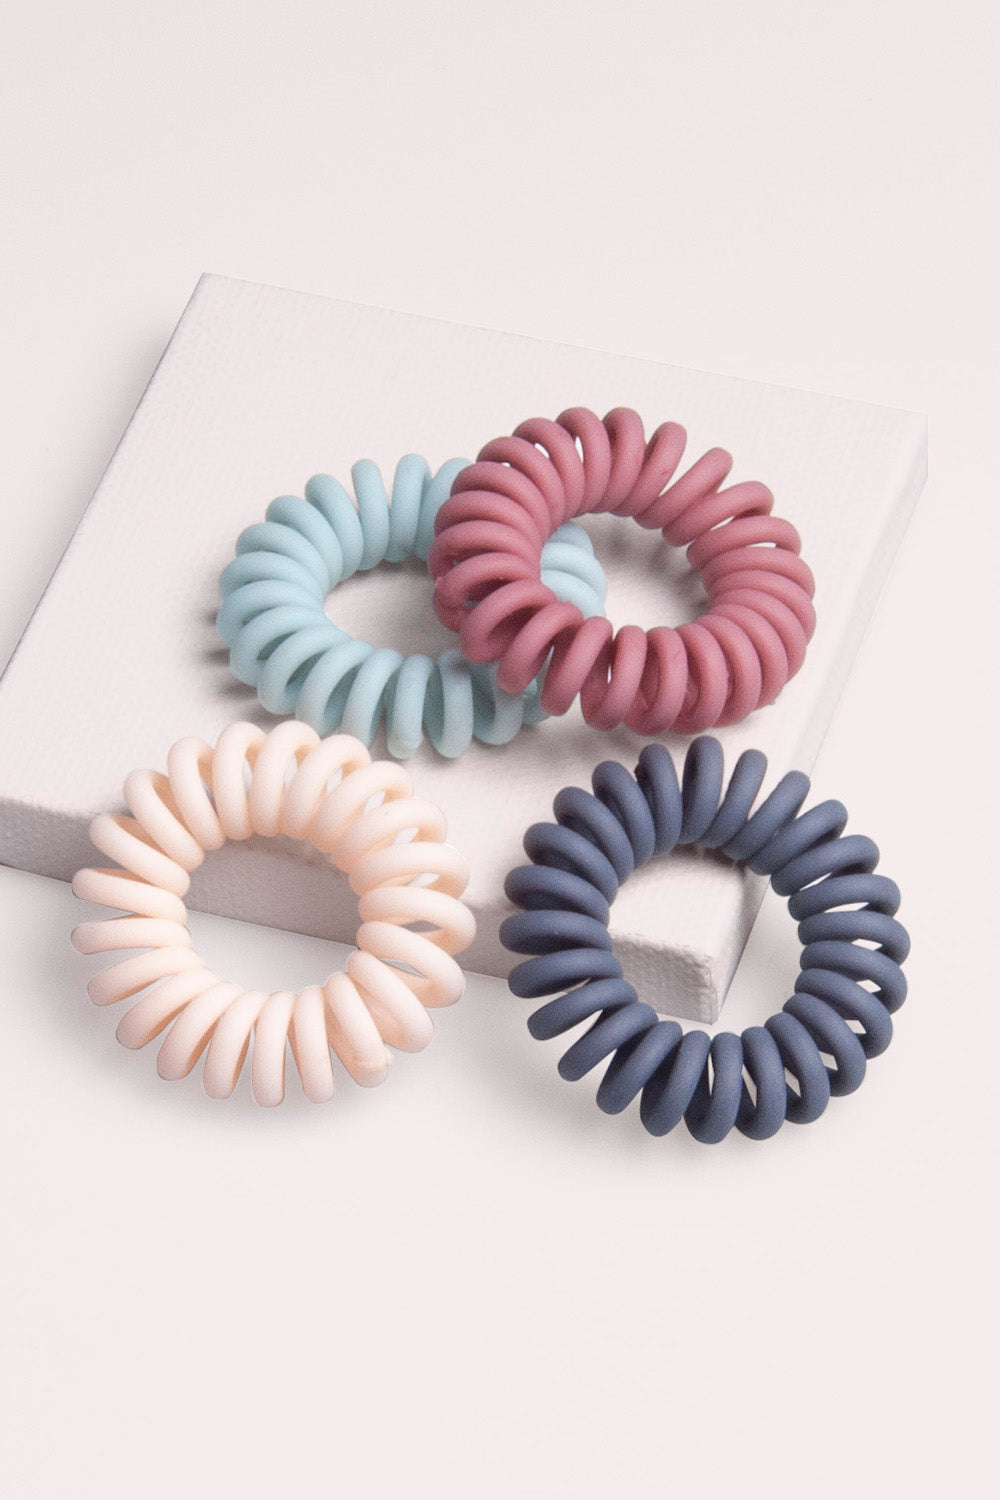 Hair Tie Holder  Treats and Trends